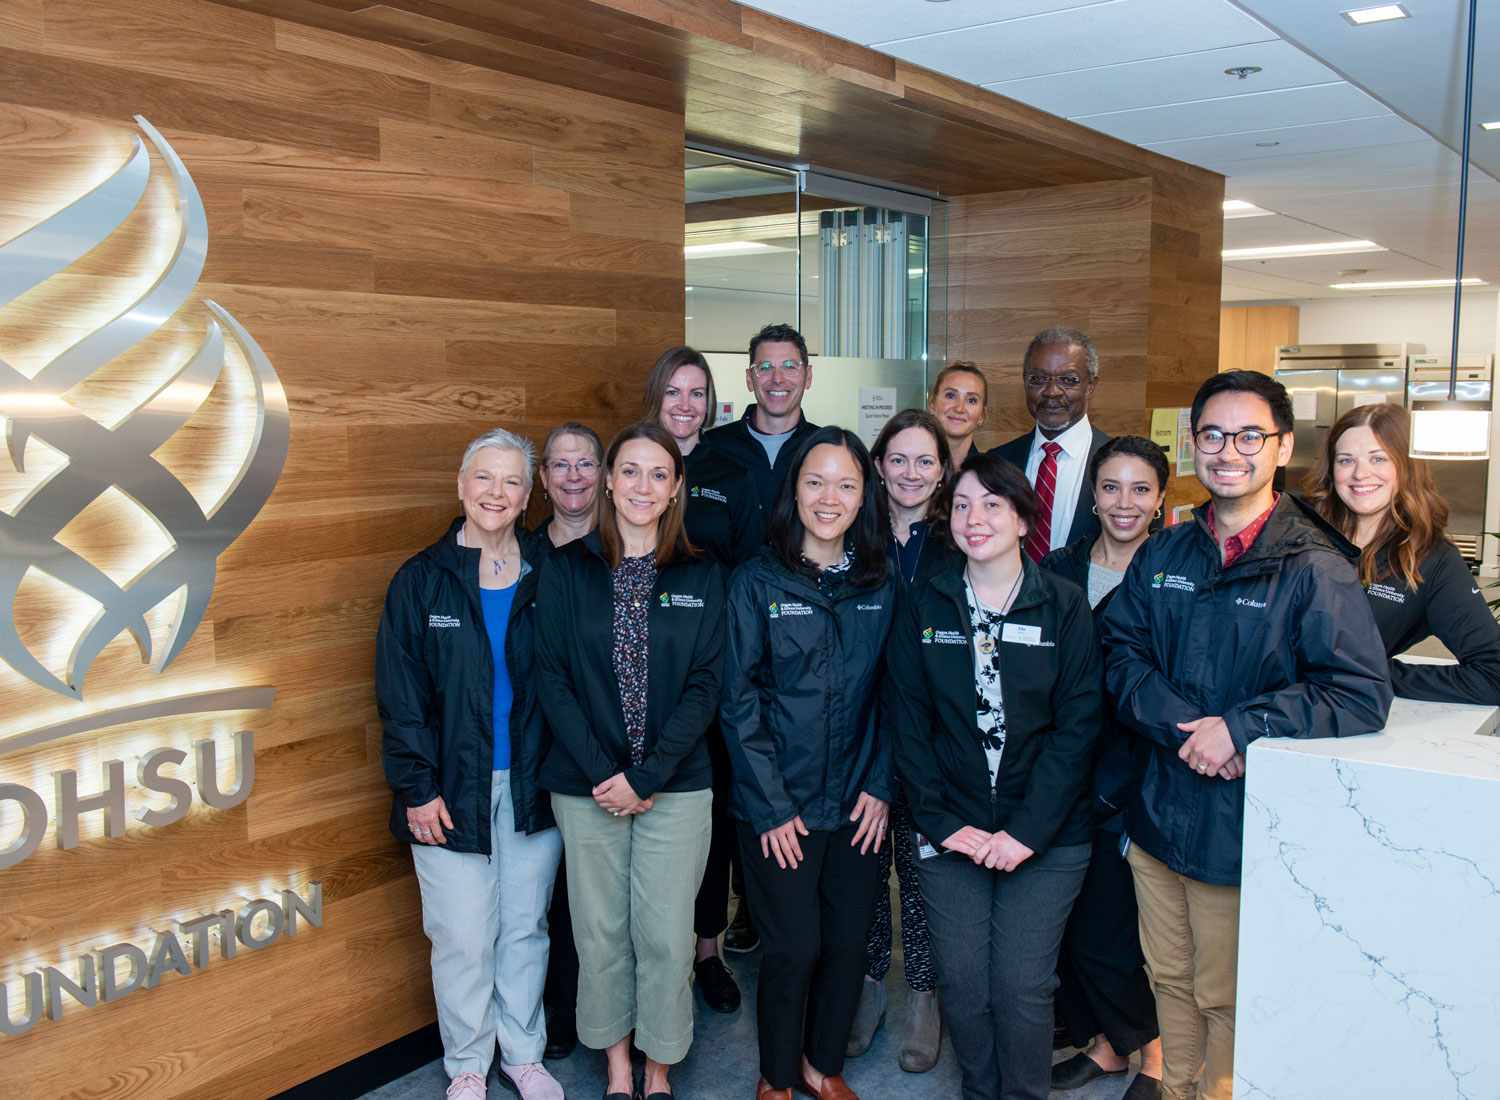 Members of the OHSU Foundation staff pose for a photo in the foundation lobby with OHSU President Danny Jacobs, M.D.